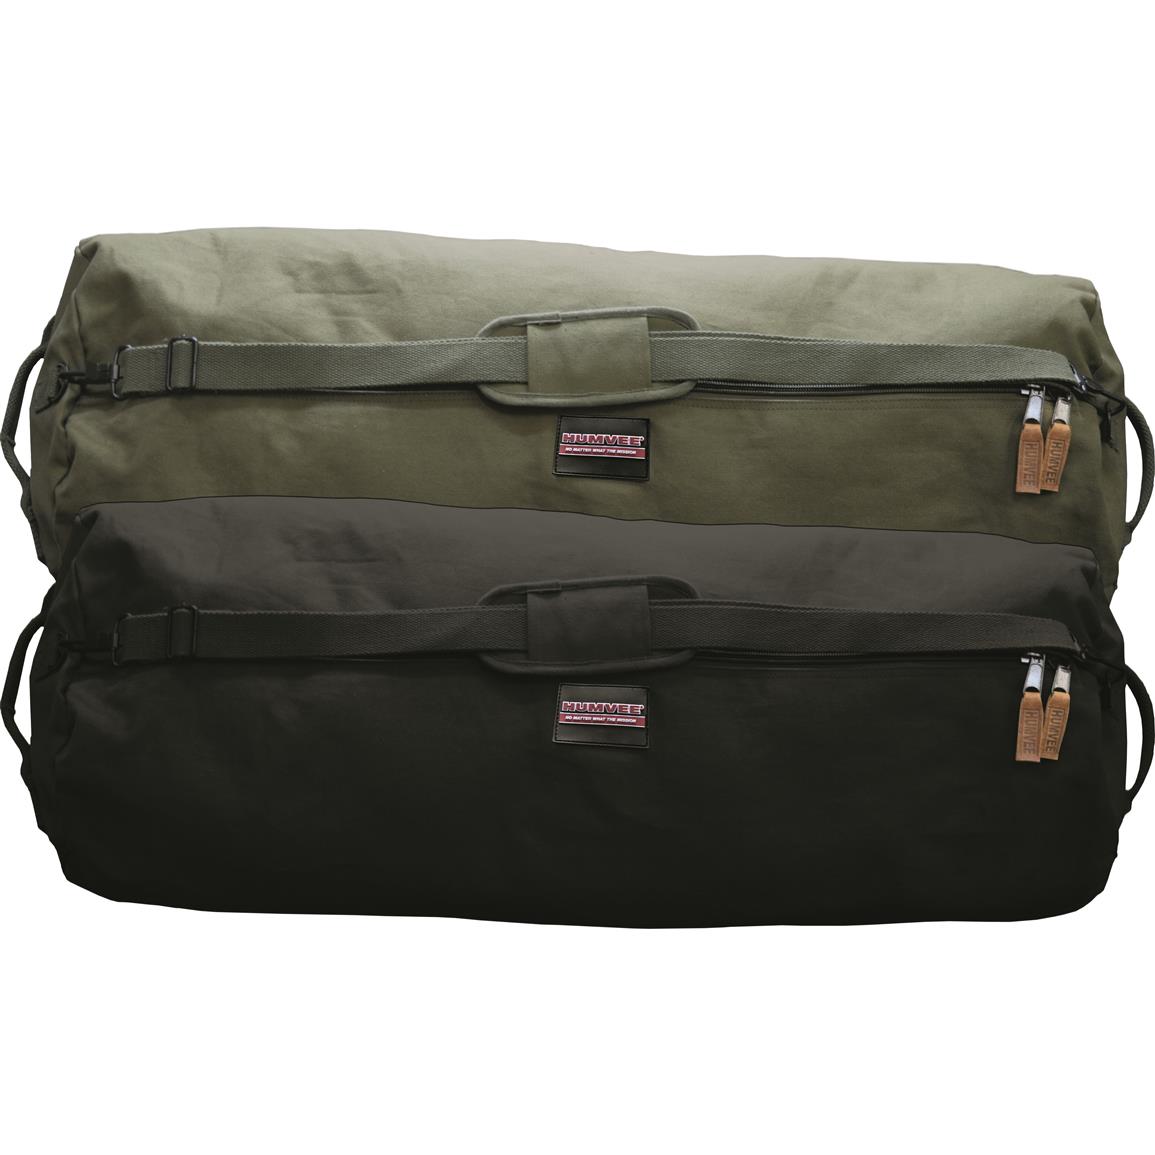 Humvee Large Duffle Bag - 675972, Military Style Backpacks & Bags at Sportsman&#39;s Guide